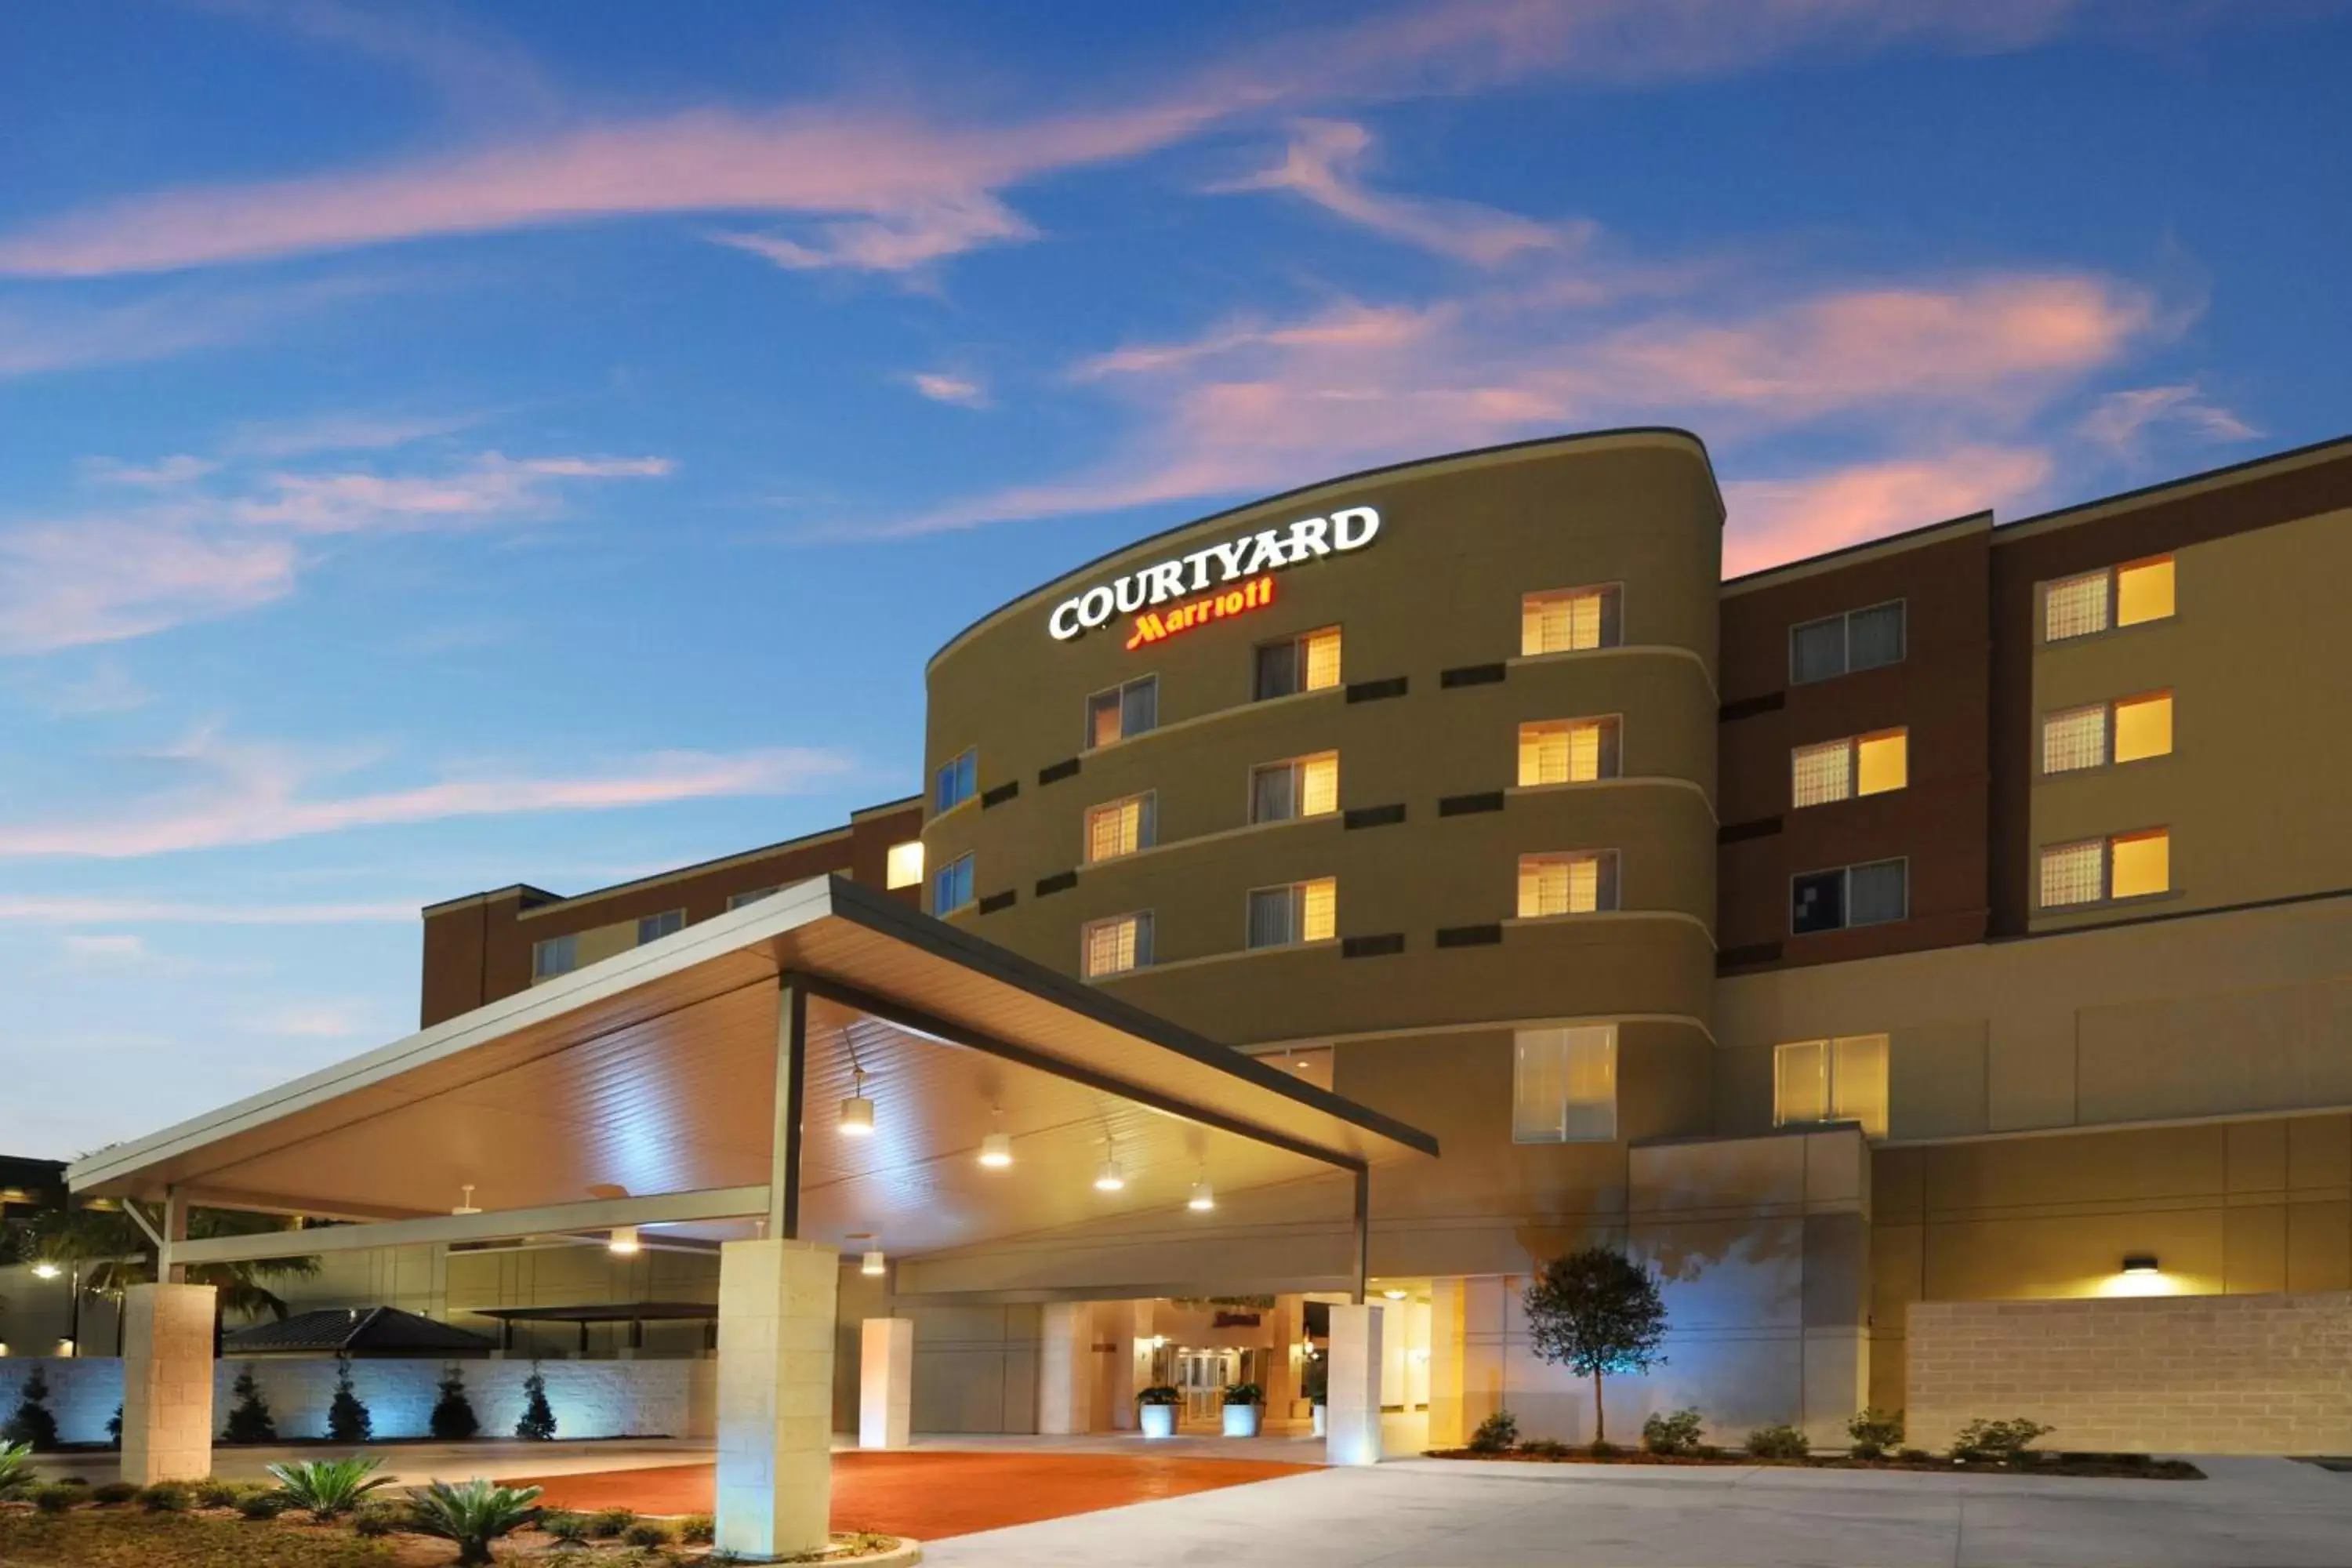 Property Building in Courtyard Marriott Houston Pearland